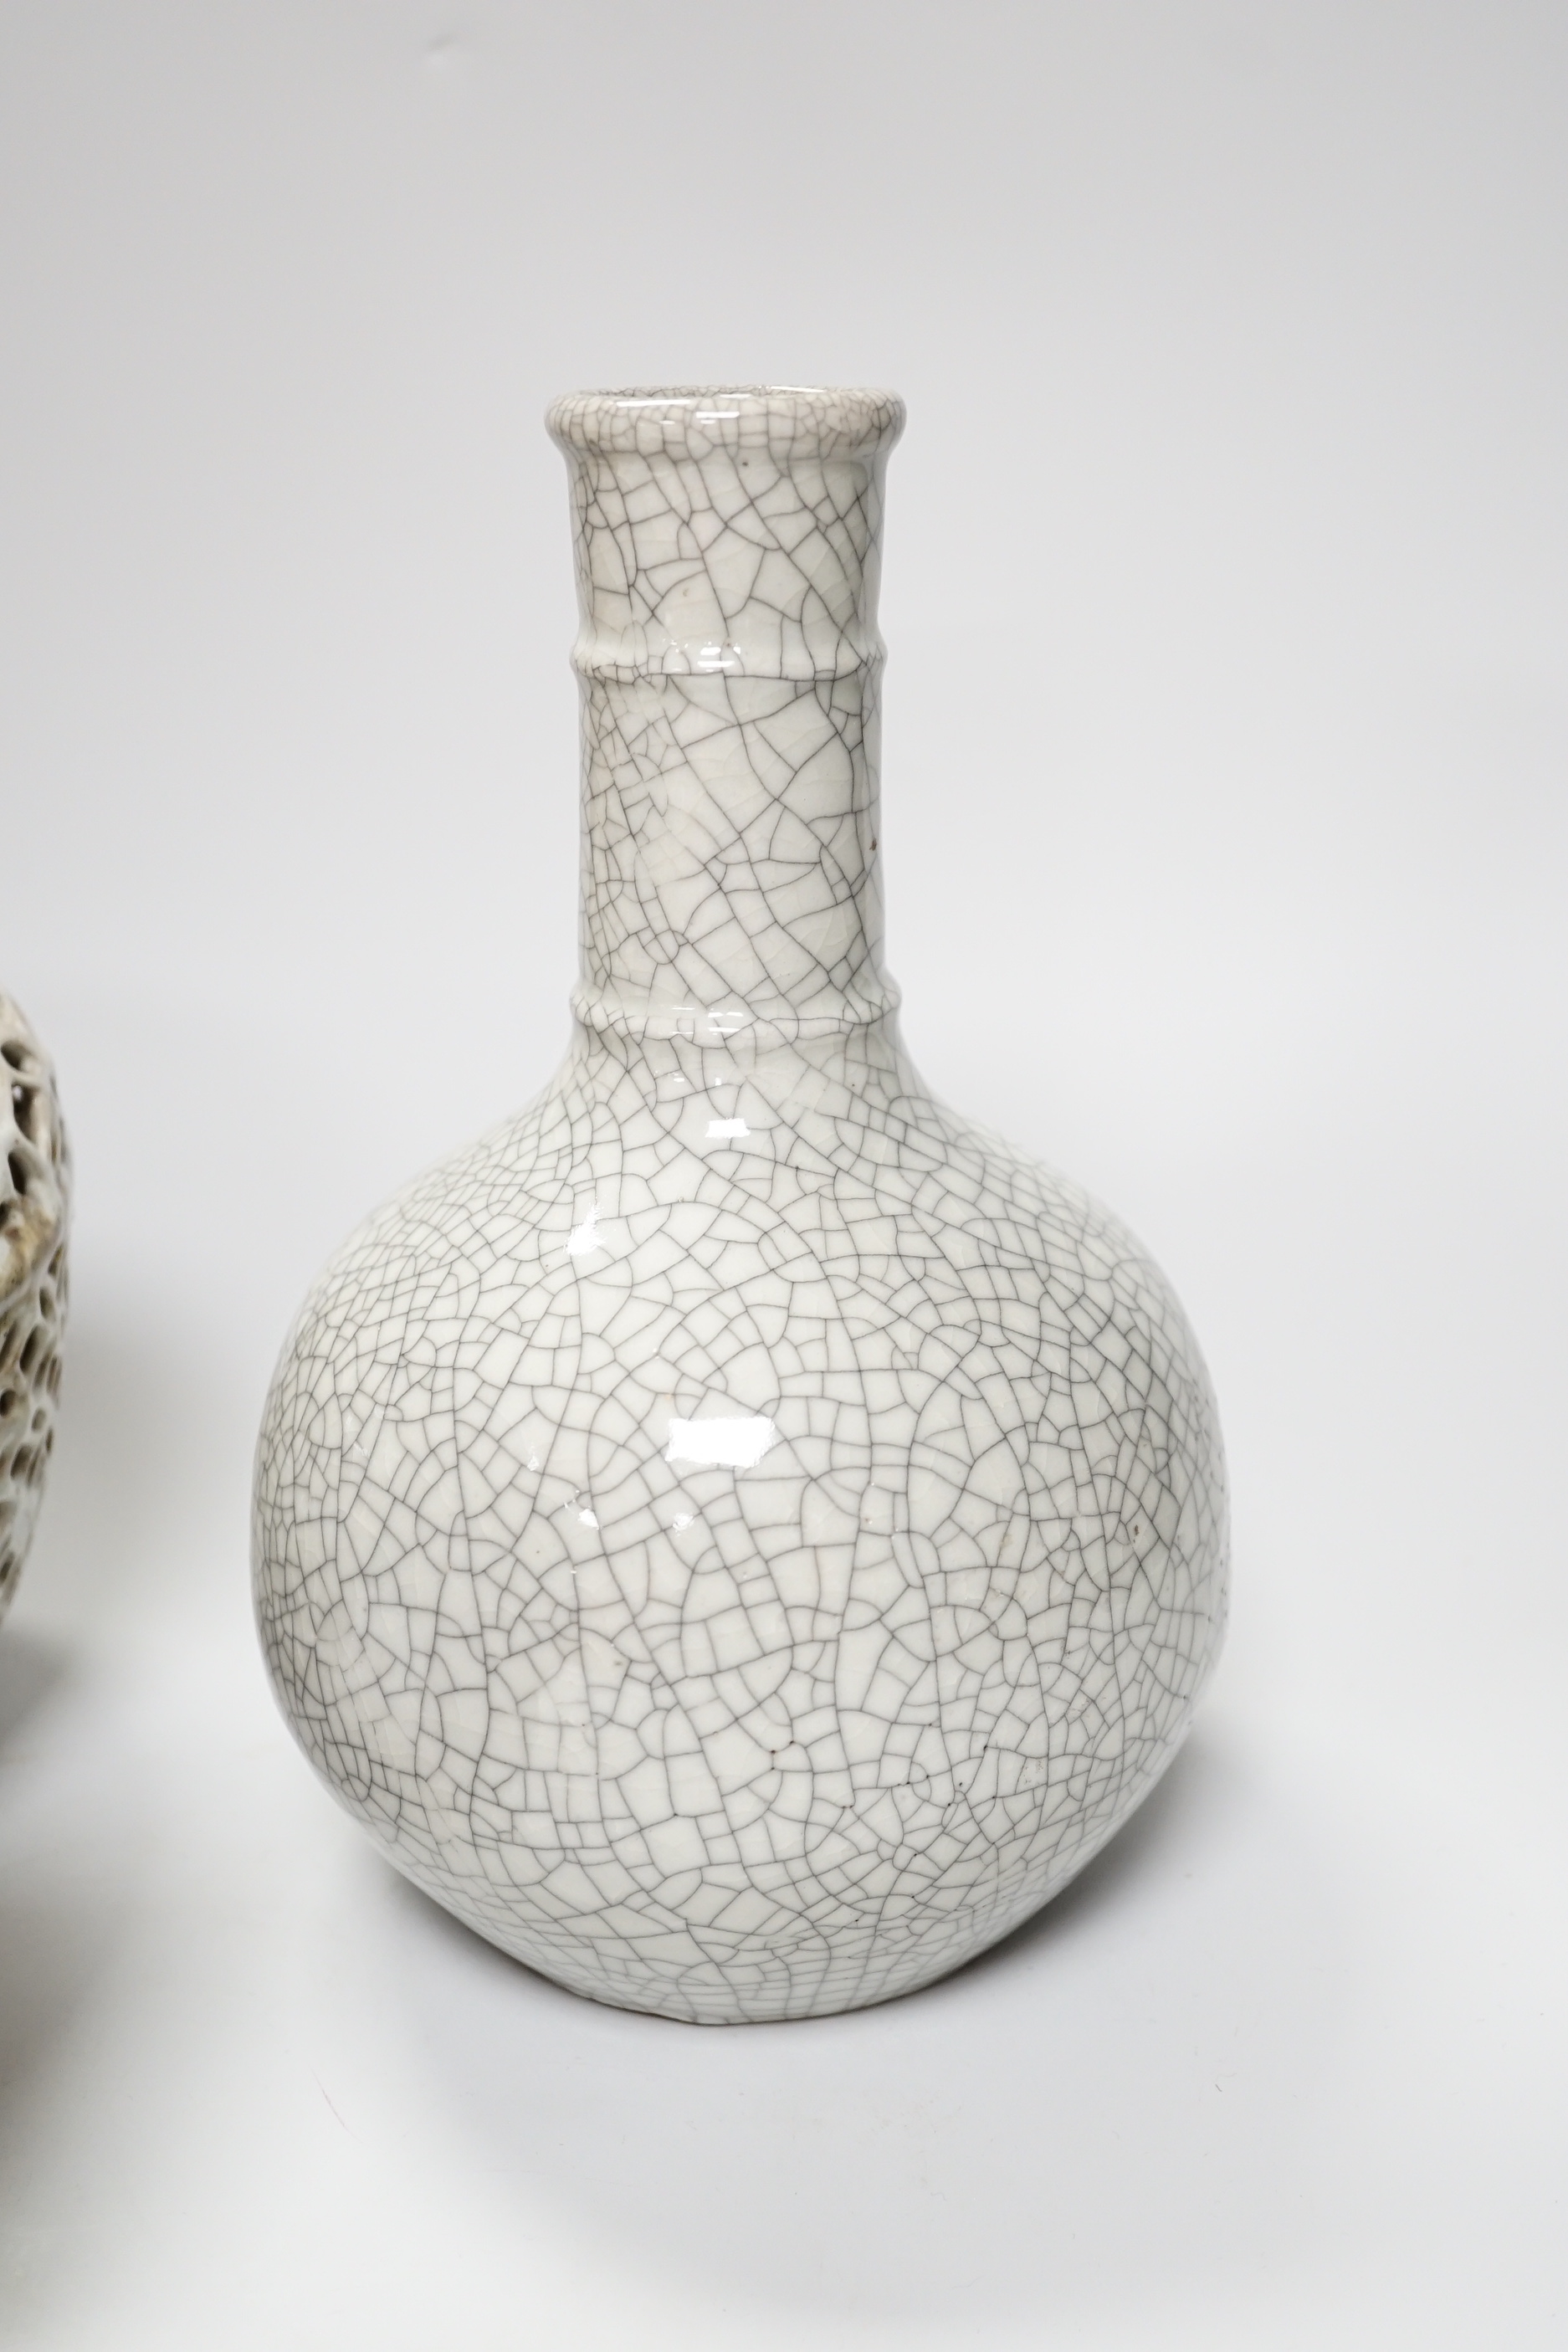 A Chinese crackle glaze bottle vase, a reticulated pottery vase and pottery vase, tallest 23cm high